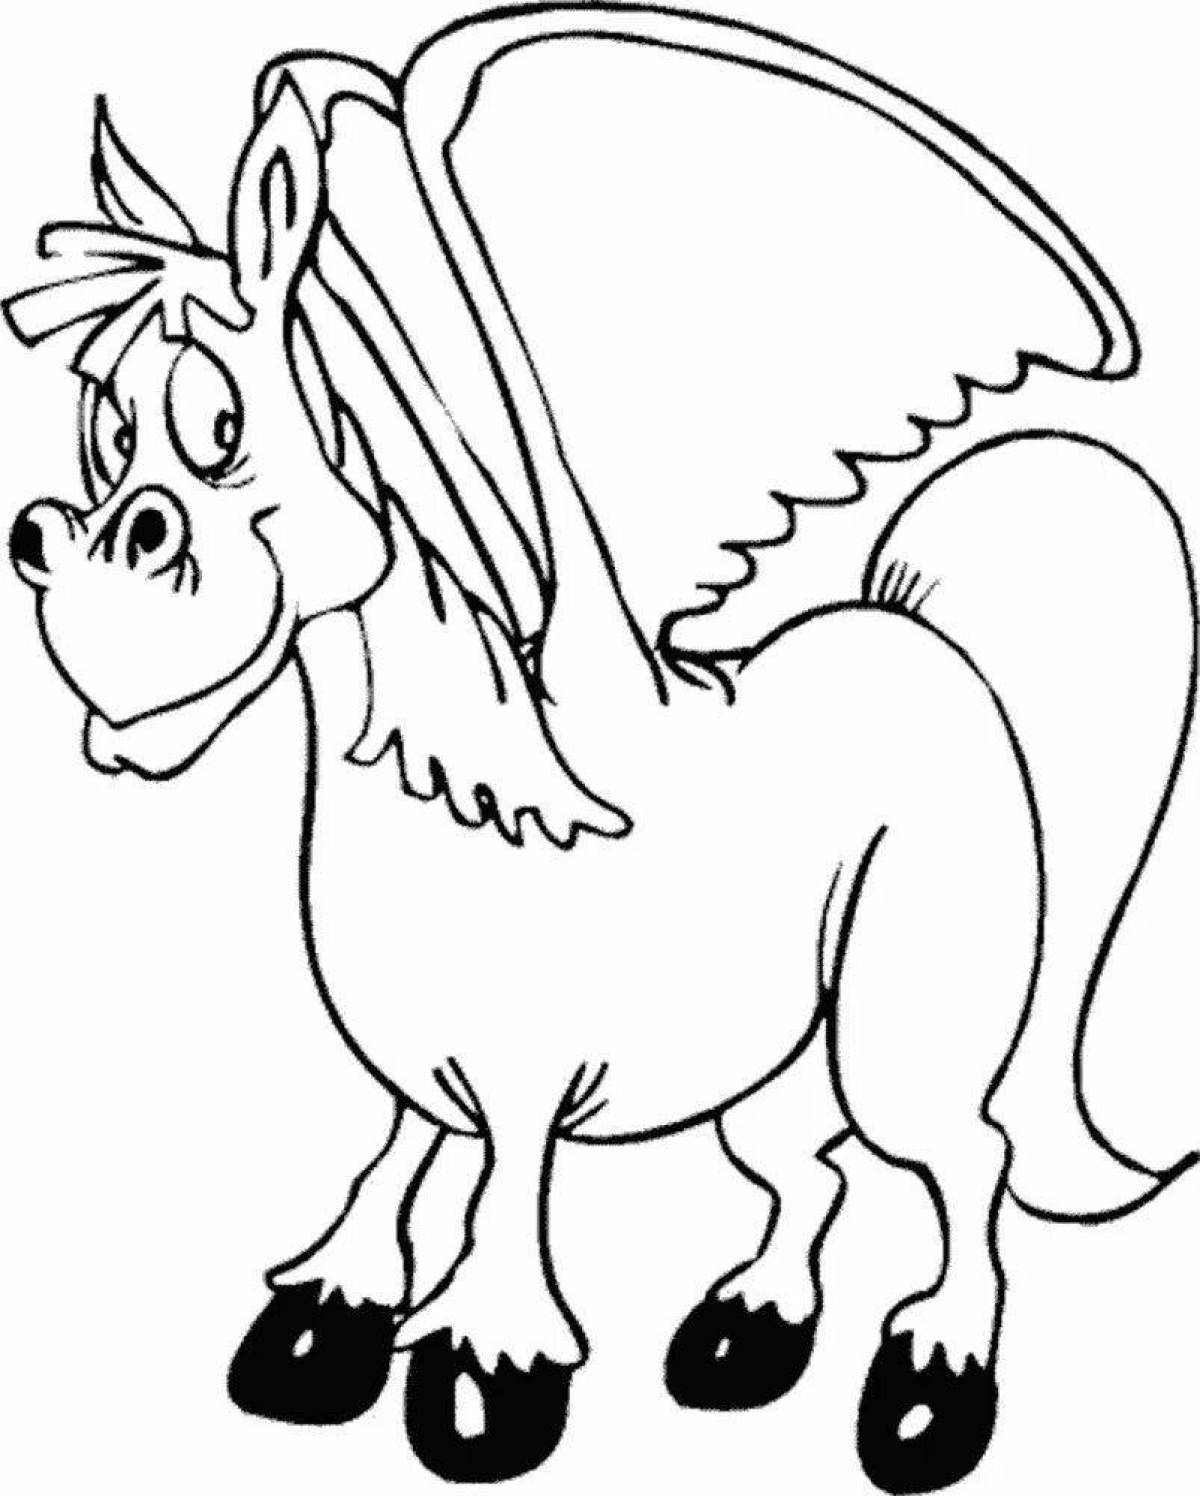 Awesome pegasus coloring book for kids